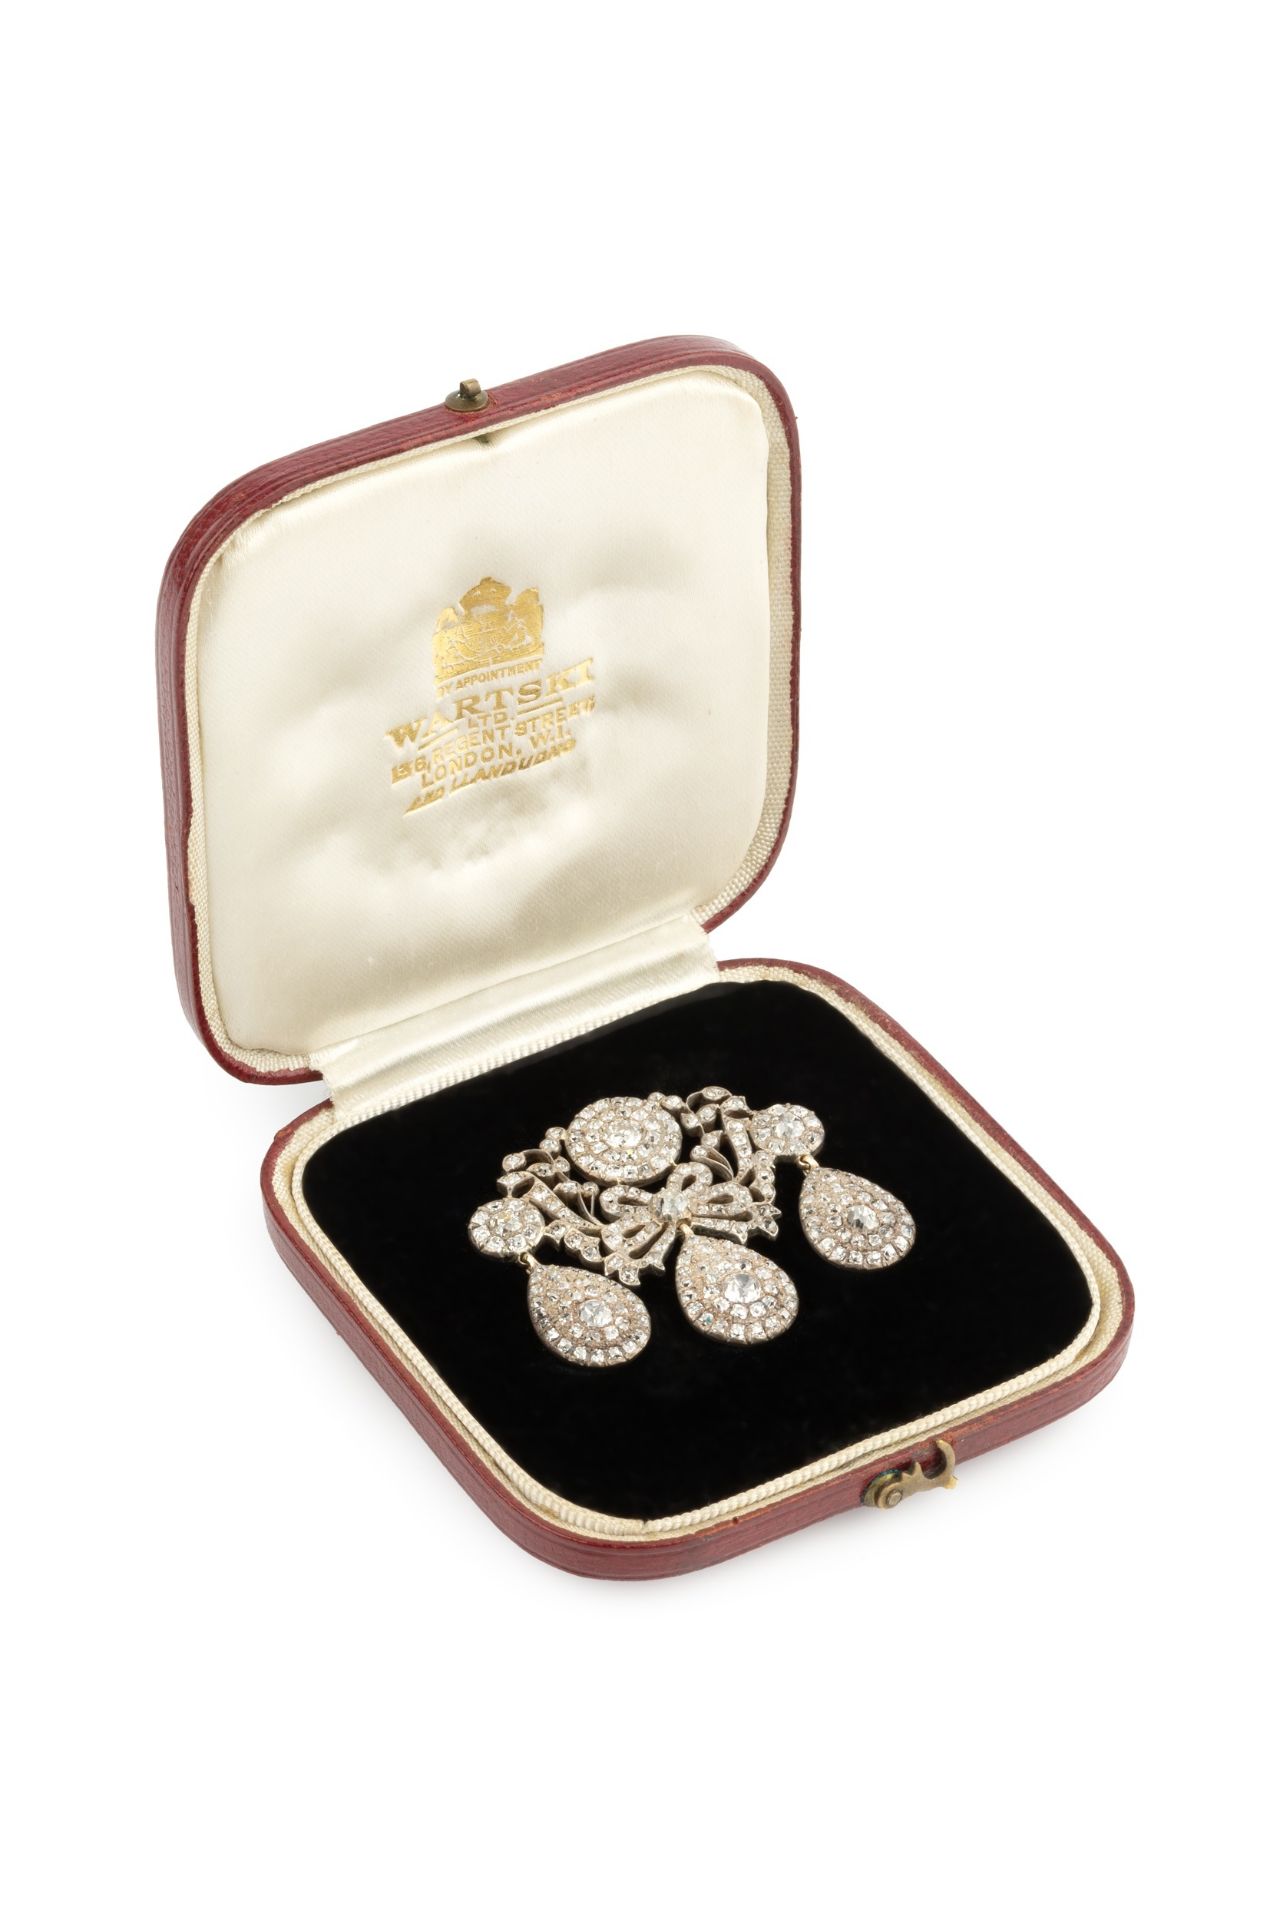 A diamond girandole brooch, formed as a trio of pear-shaped cluster drops suspended from a central